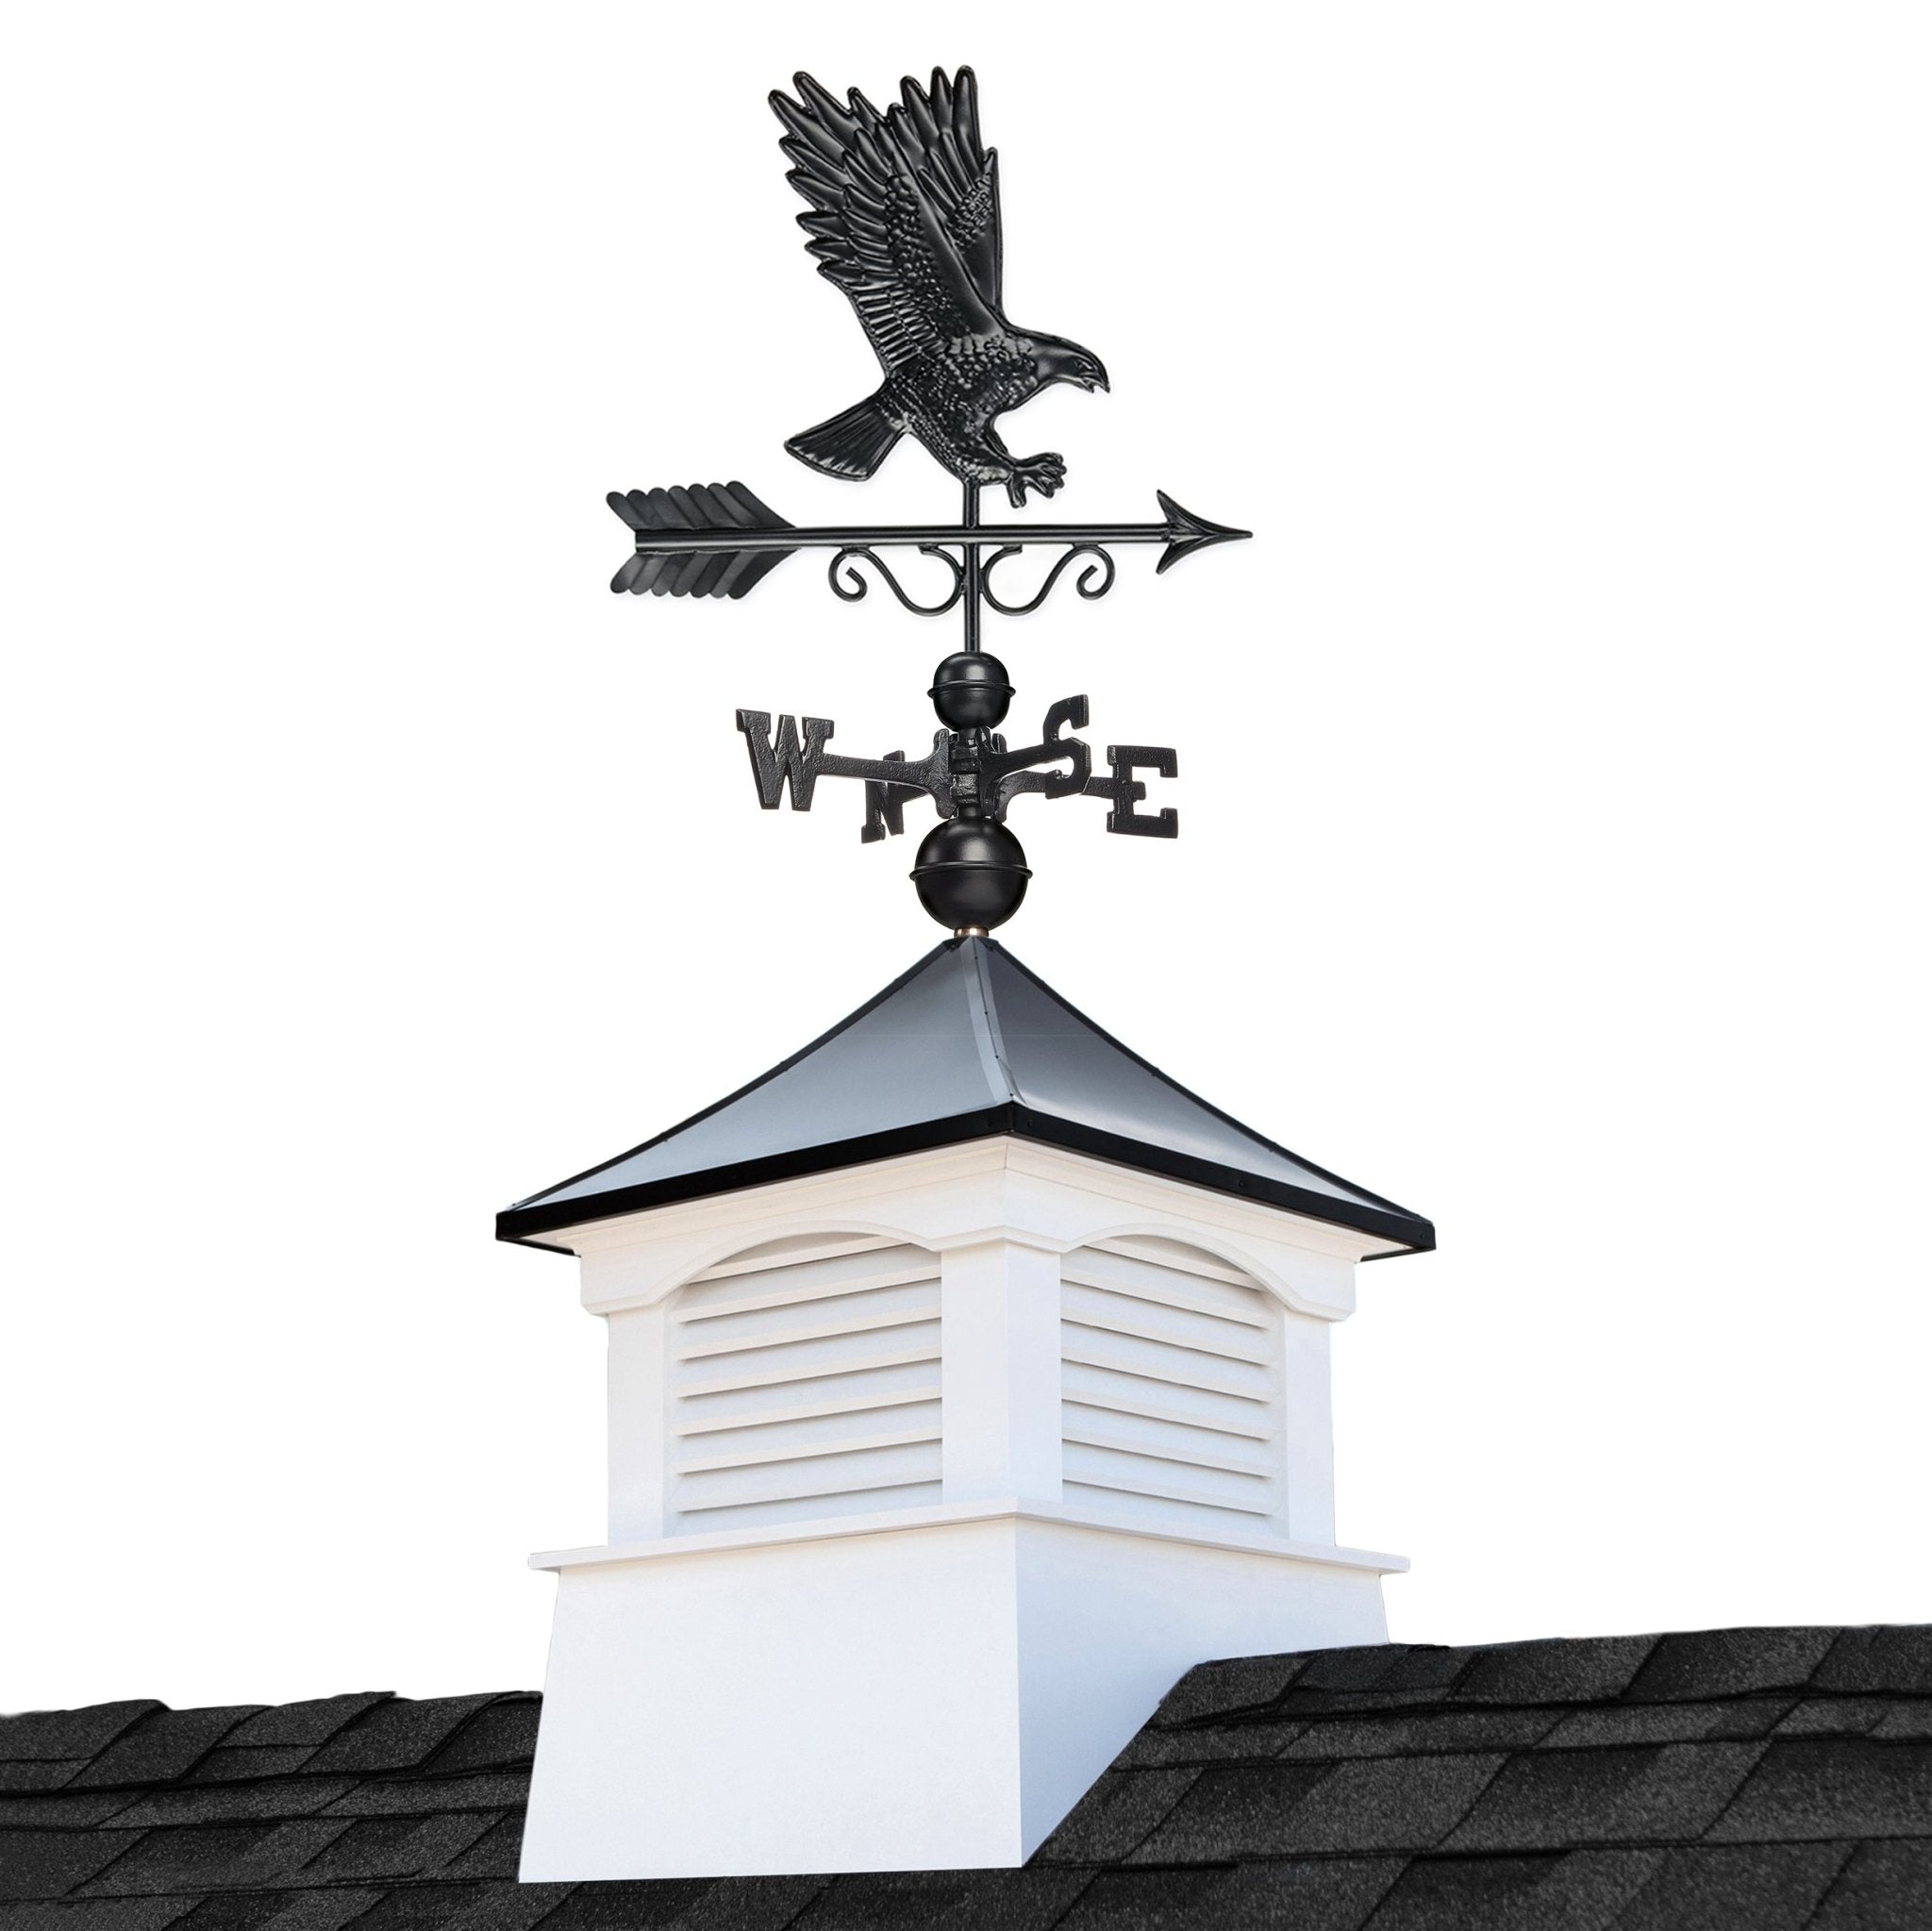 18" Square Coventry Vinyl Cupola with Black Aluminum roof and Black Aluminum Eagle Weathervane - Good Directions